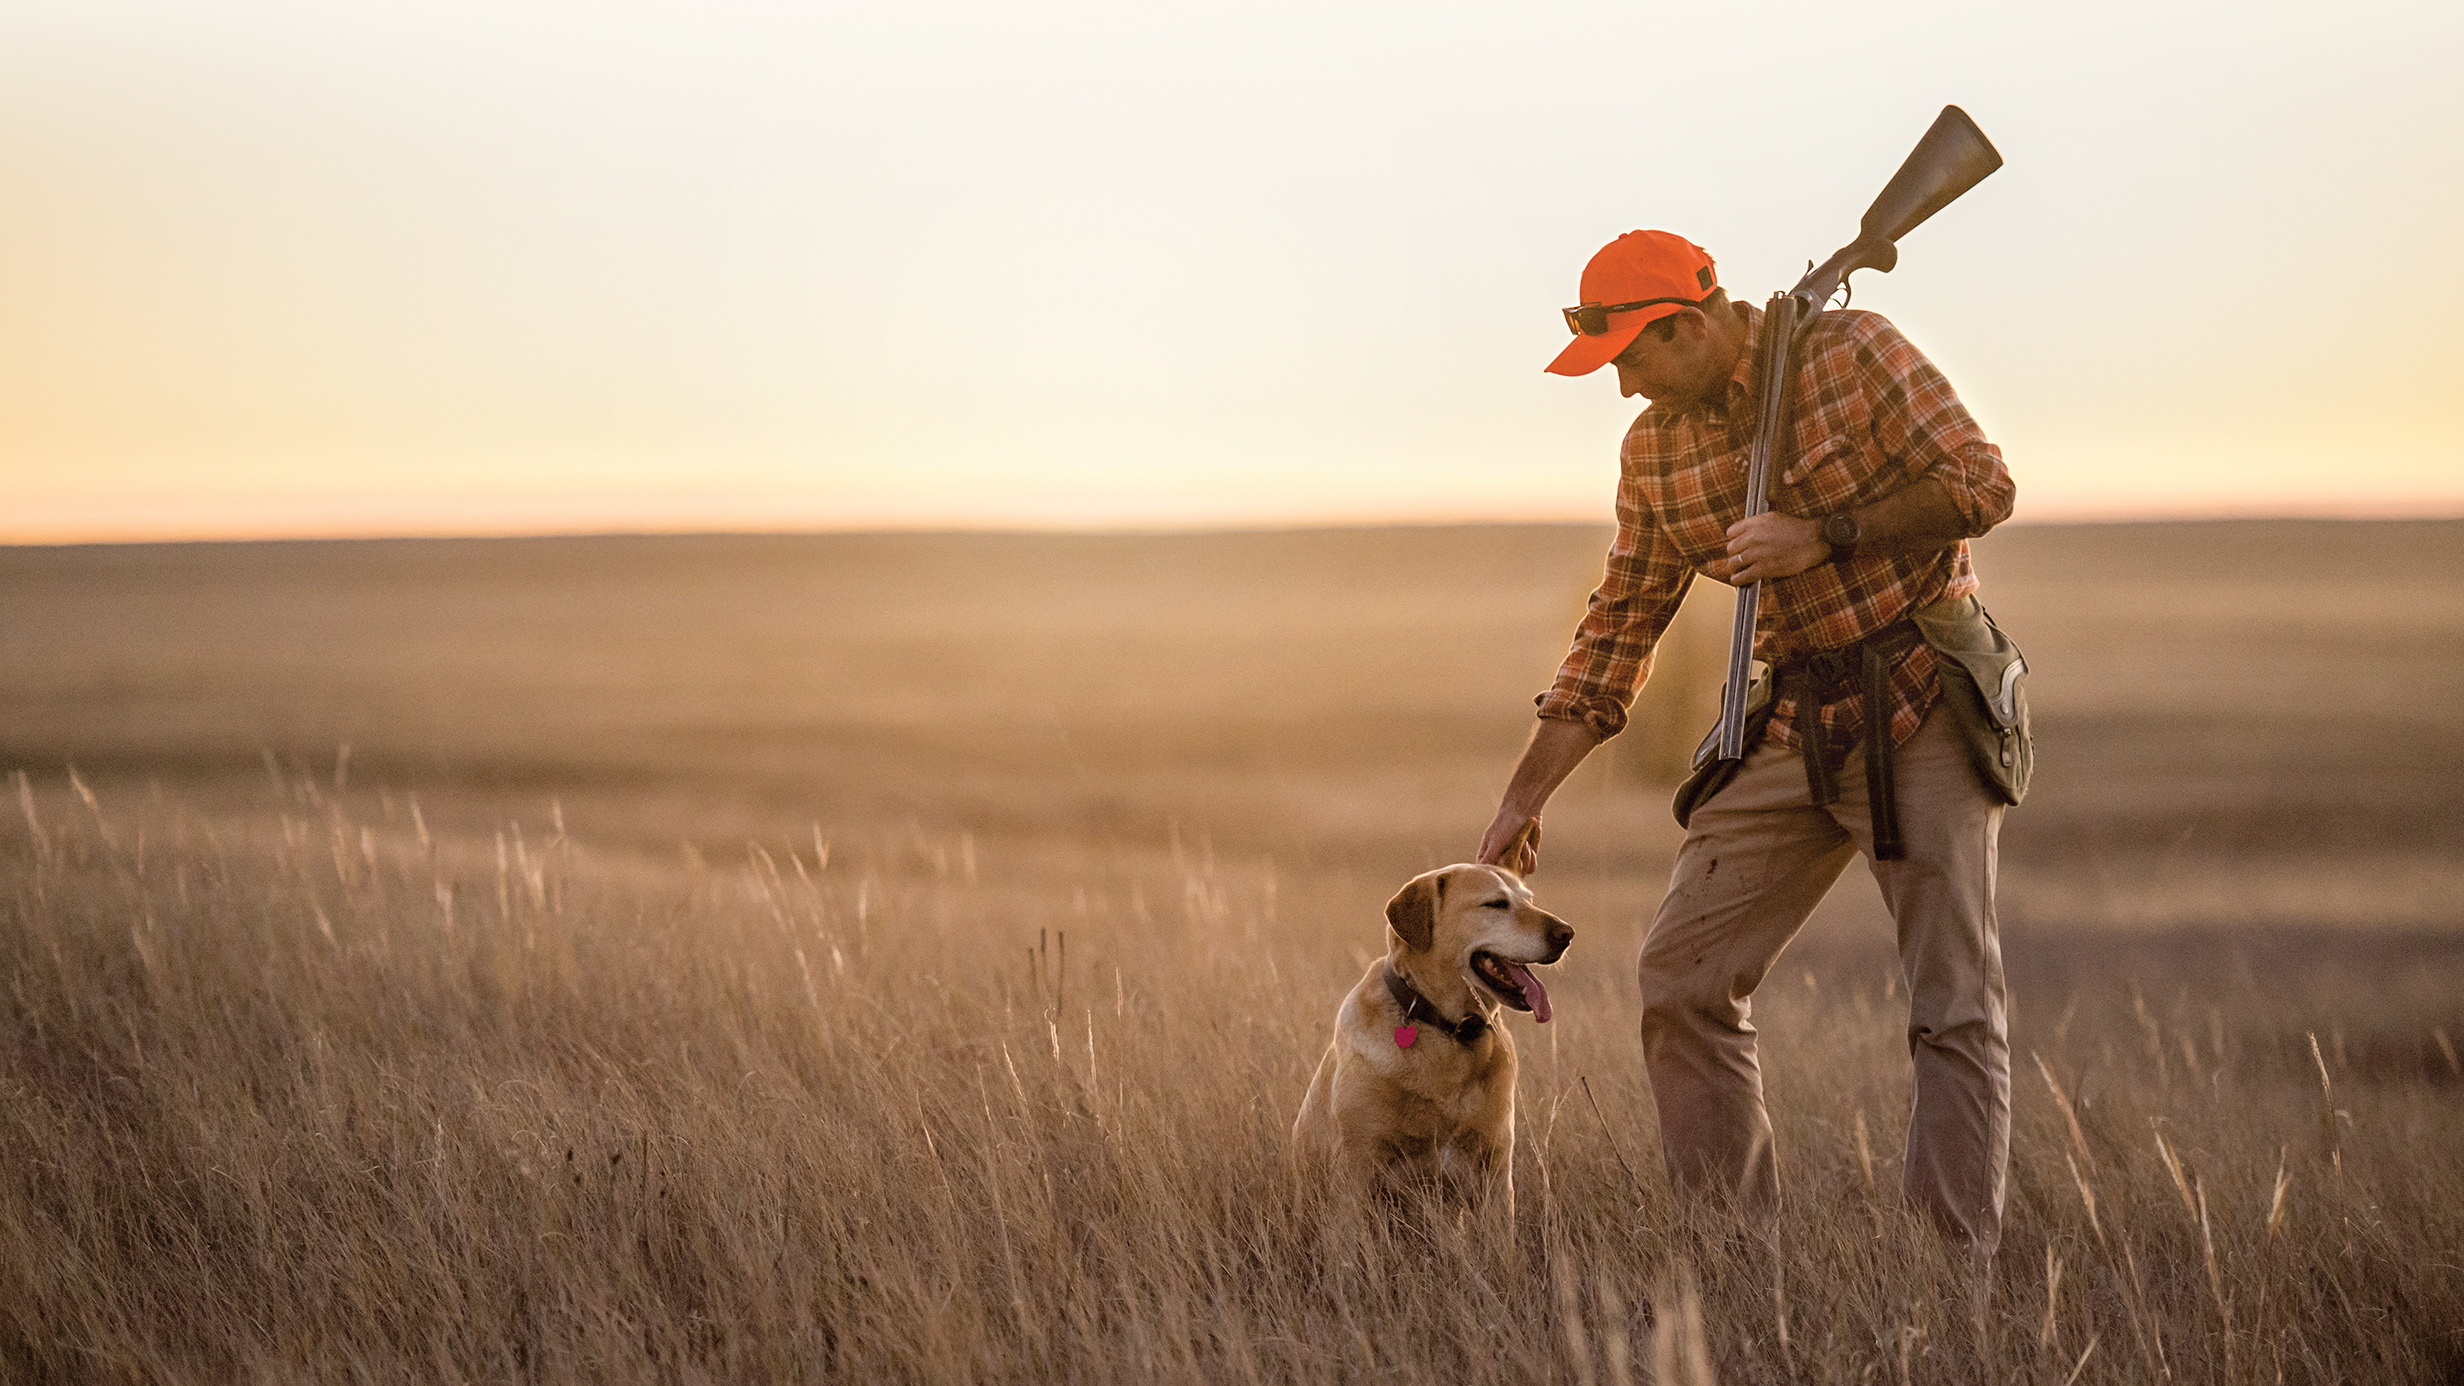 A hunter pats his dog while bird hunting on the prairie.